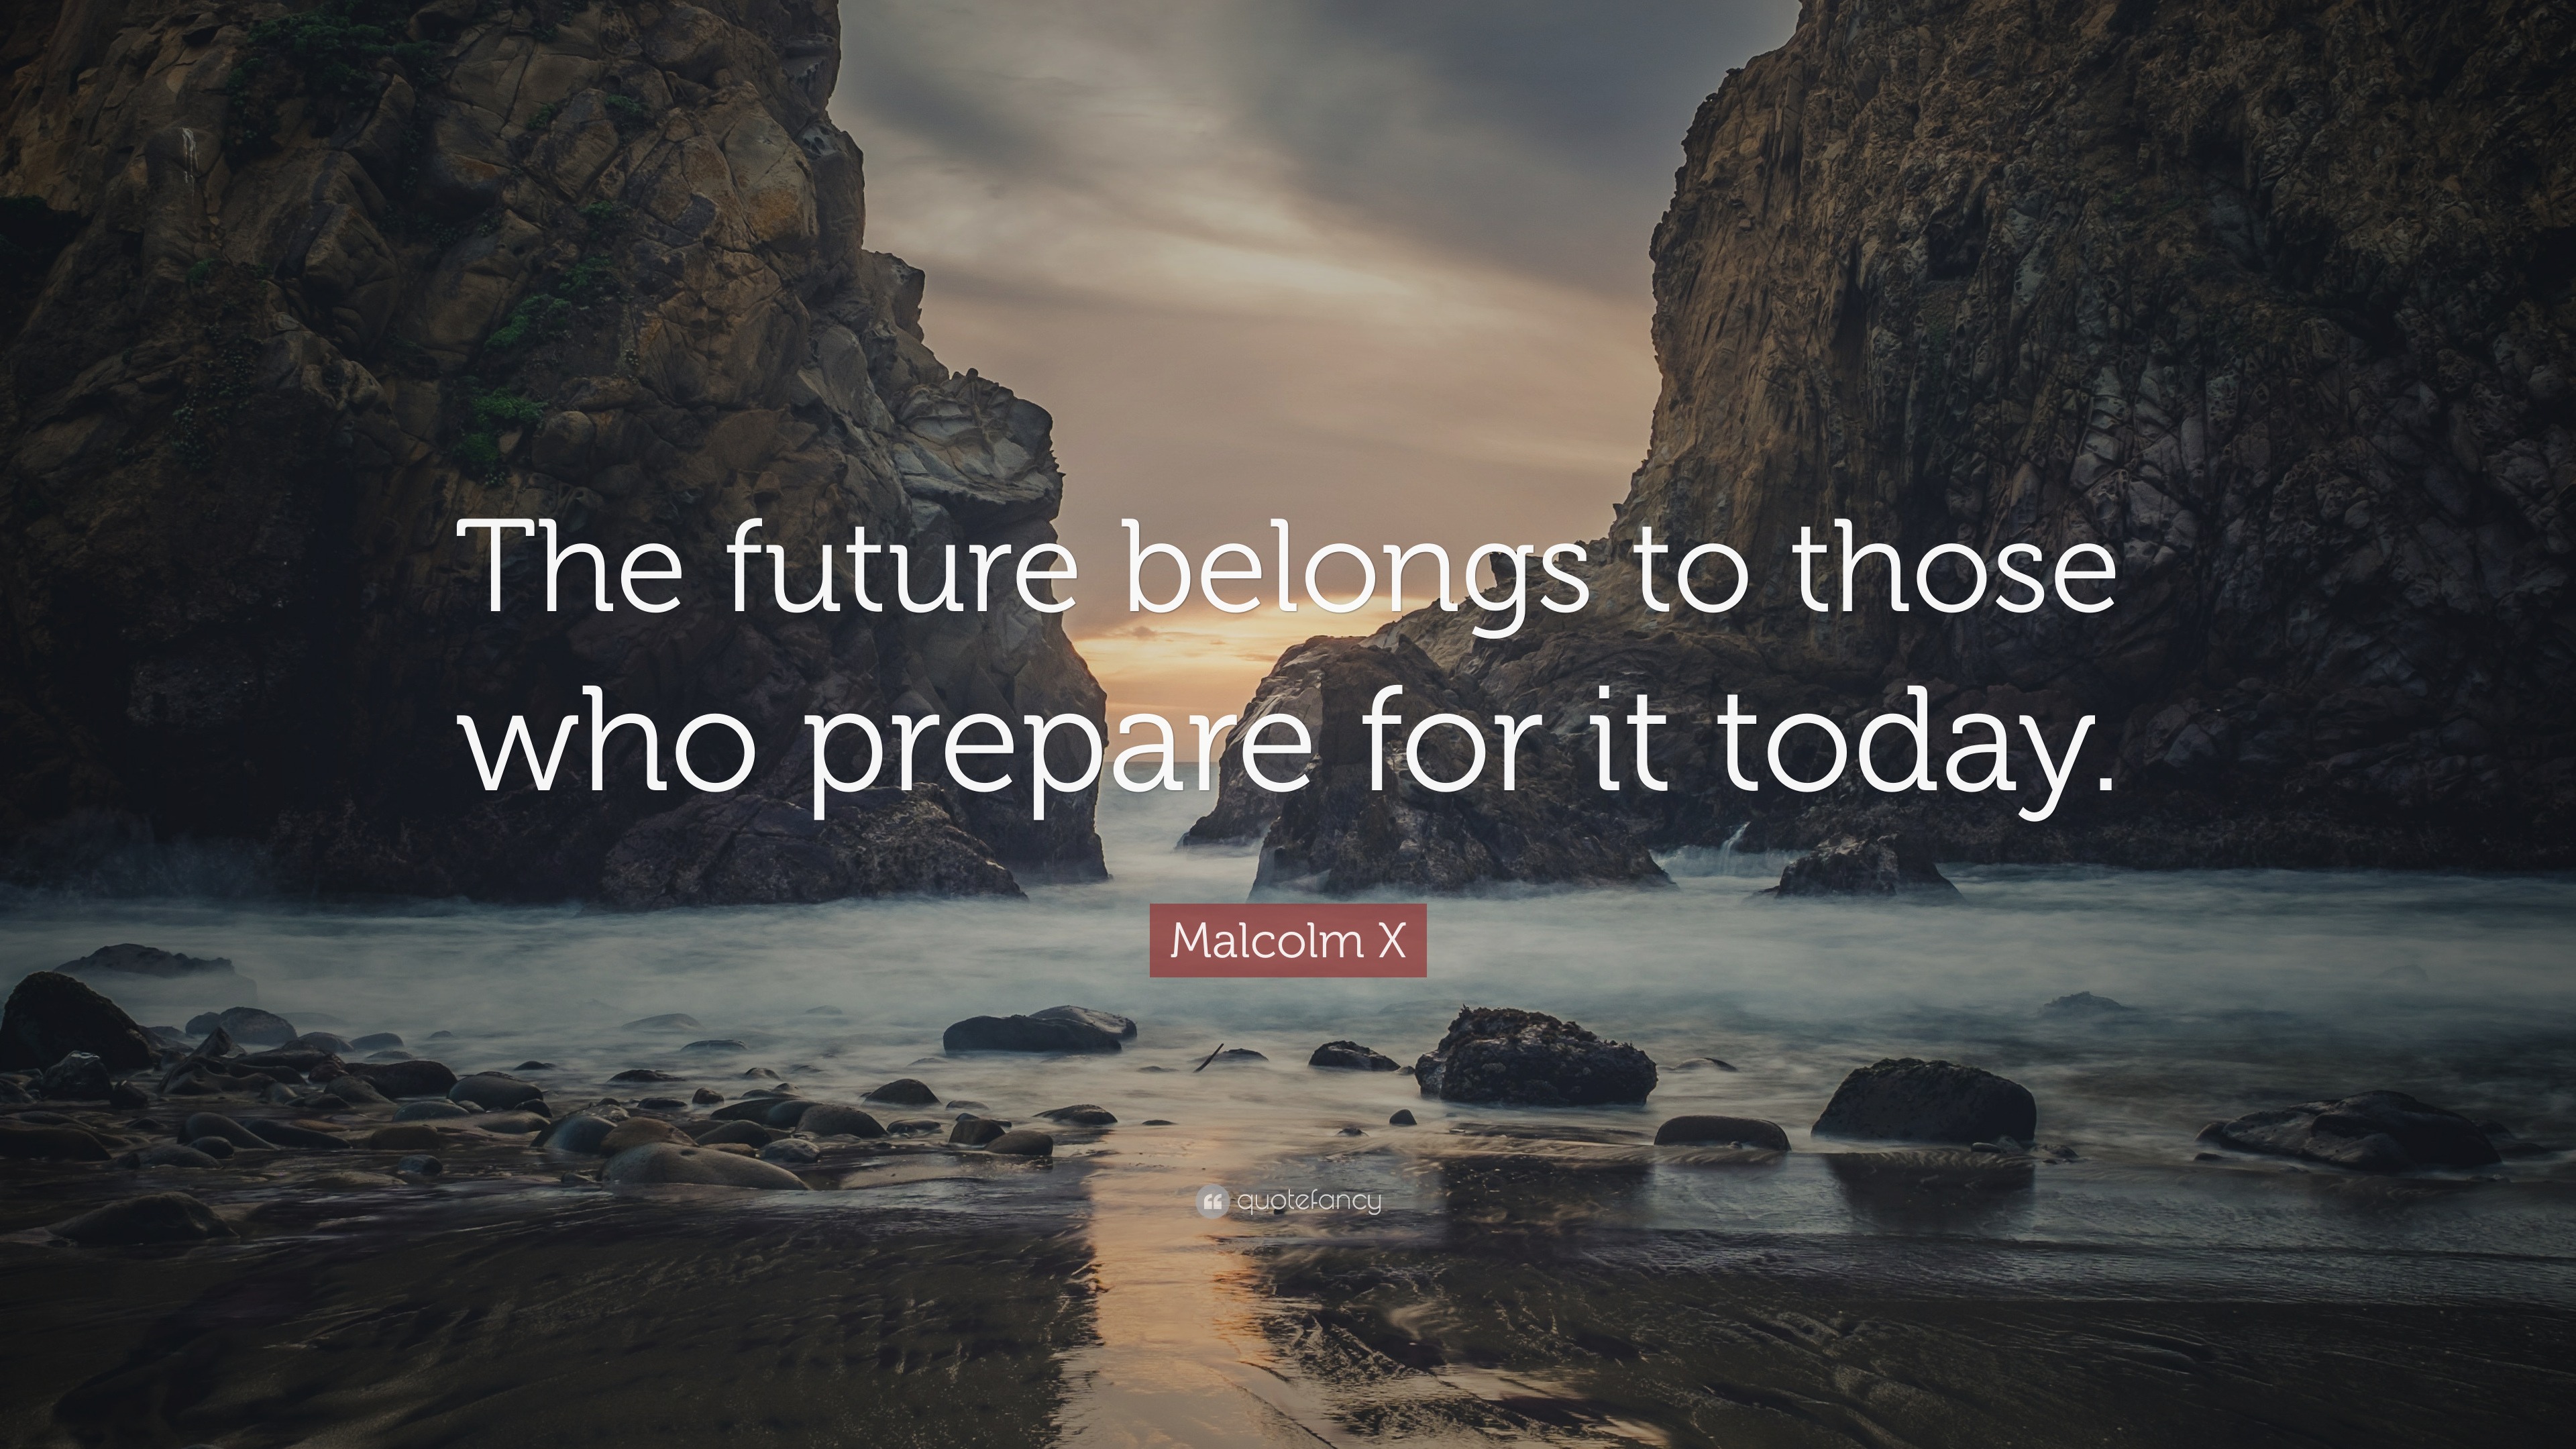 Malcolm X Quote: "The future belongs to those who prepare for it today."